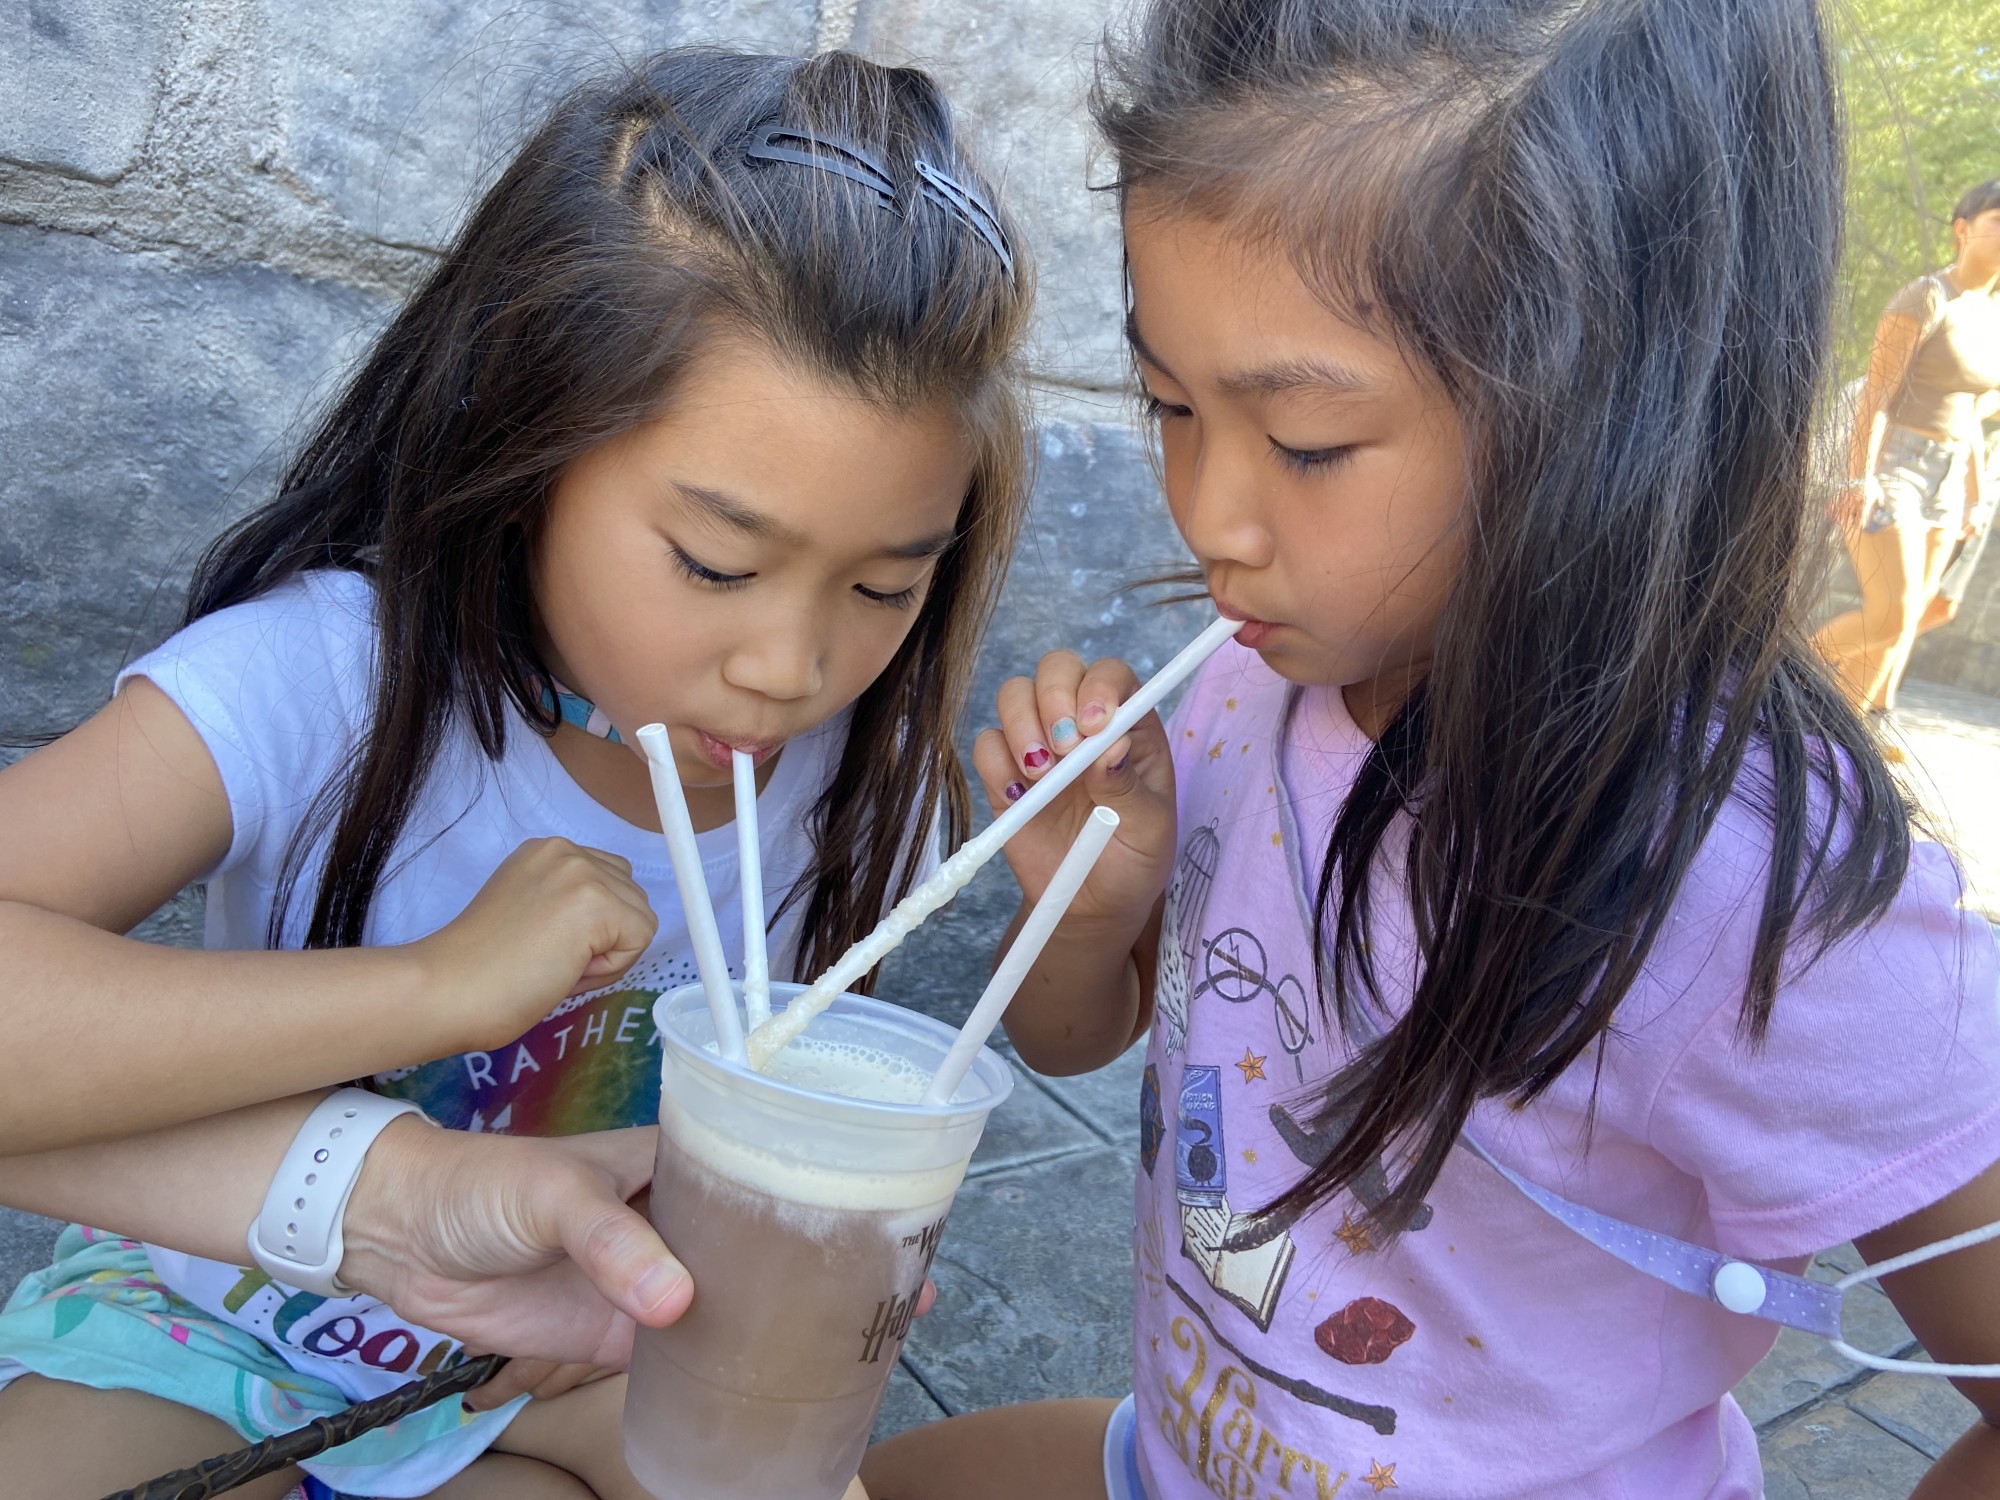 We tried some frozen butterbeer because it was a hot day.